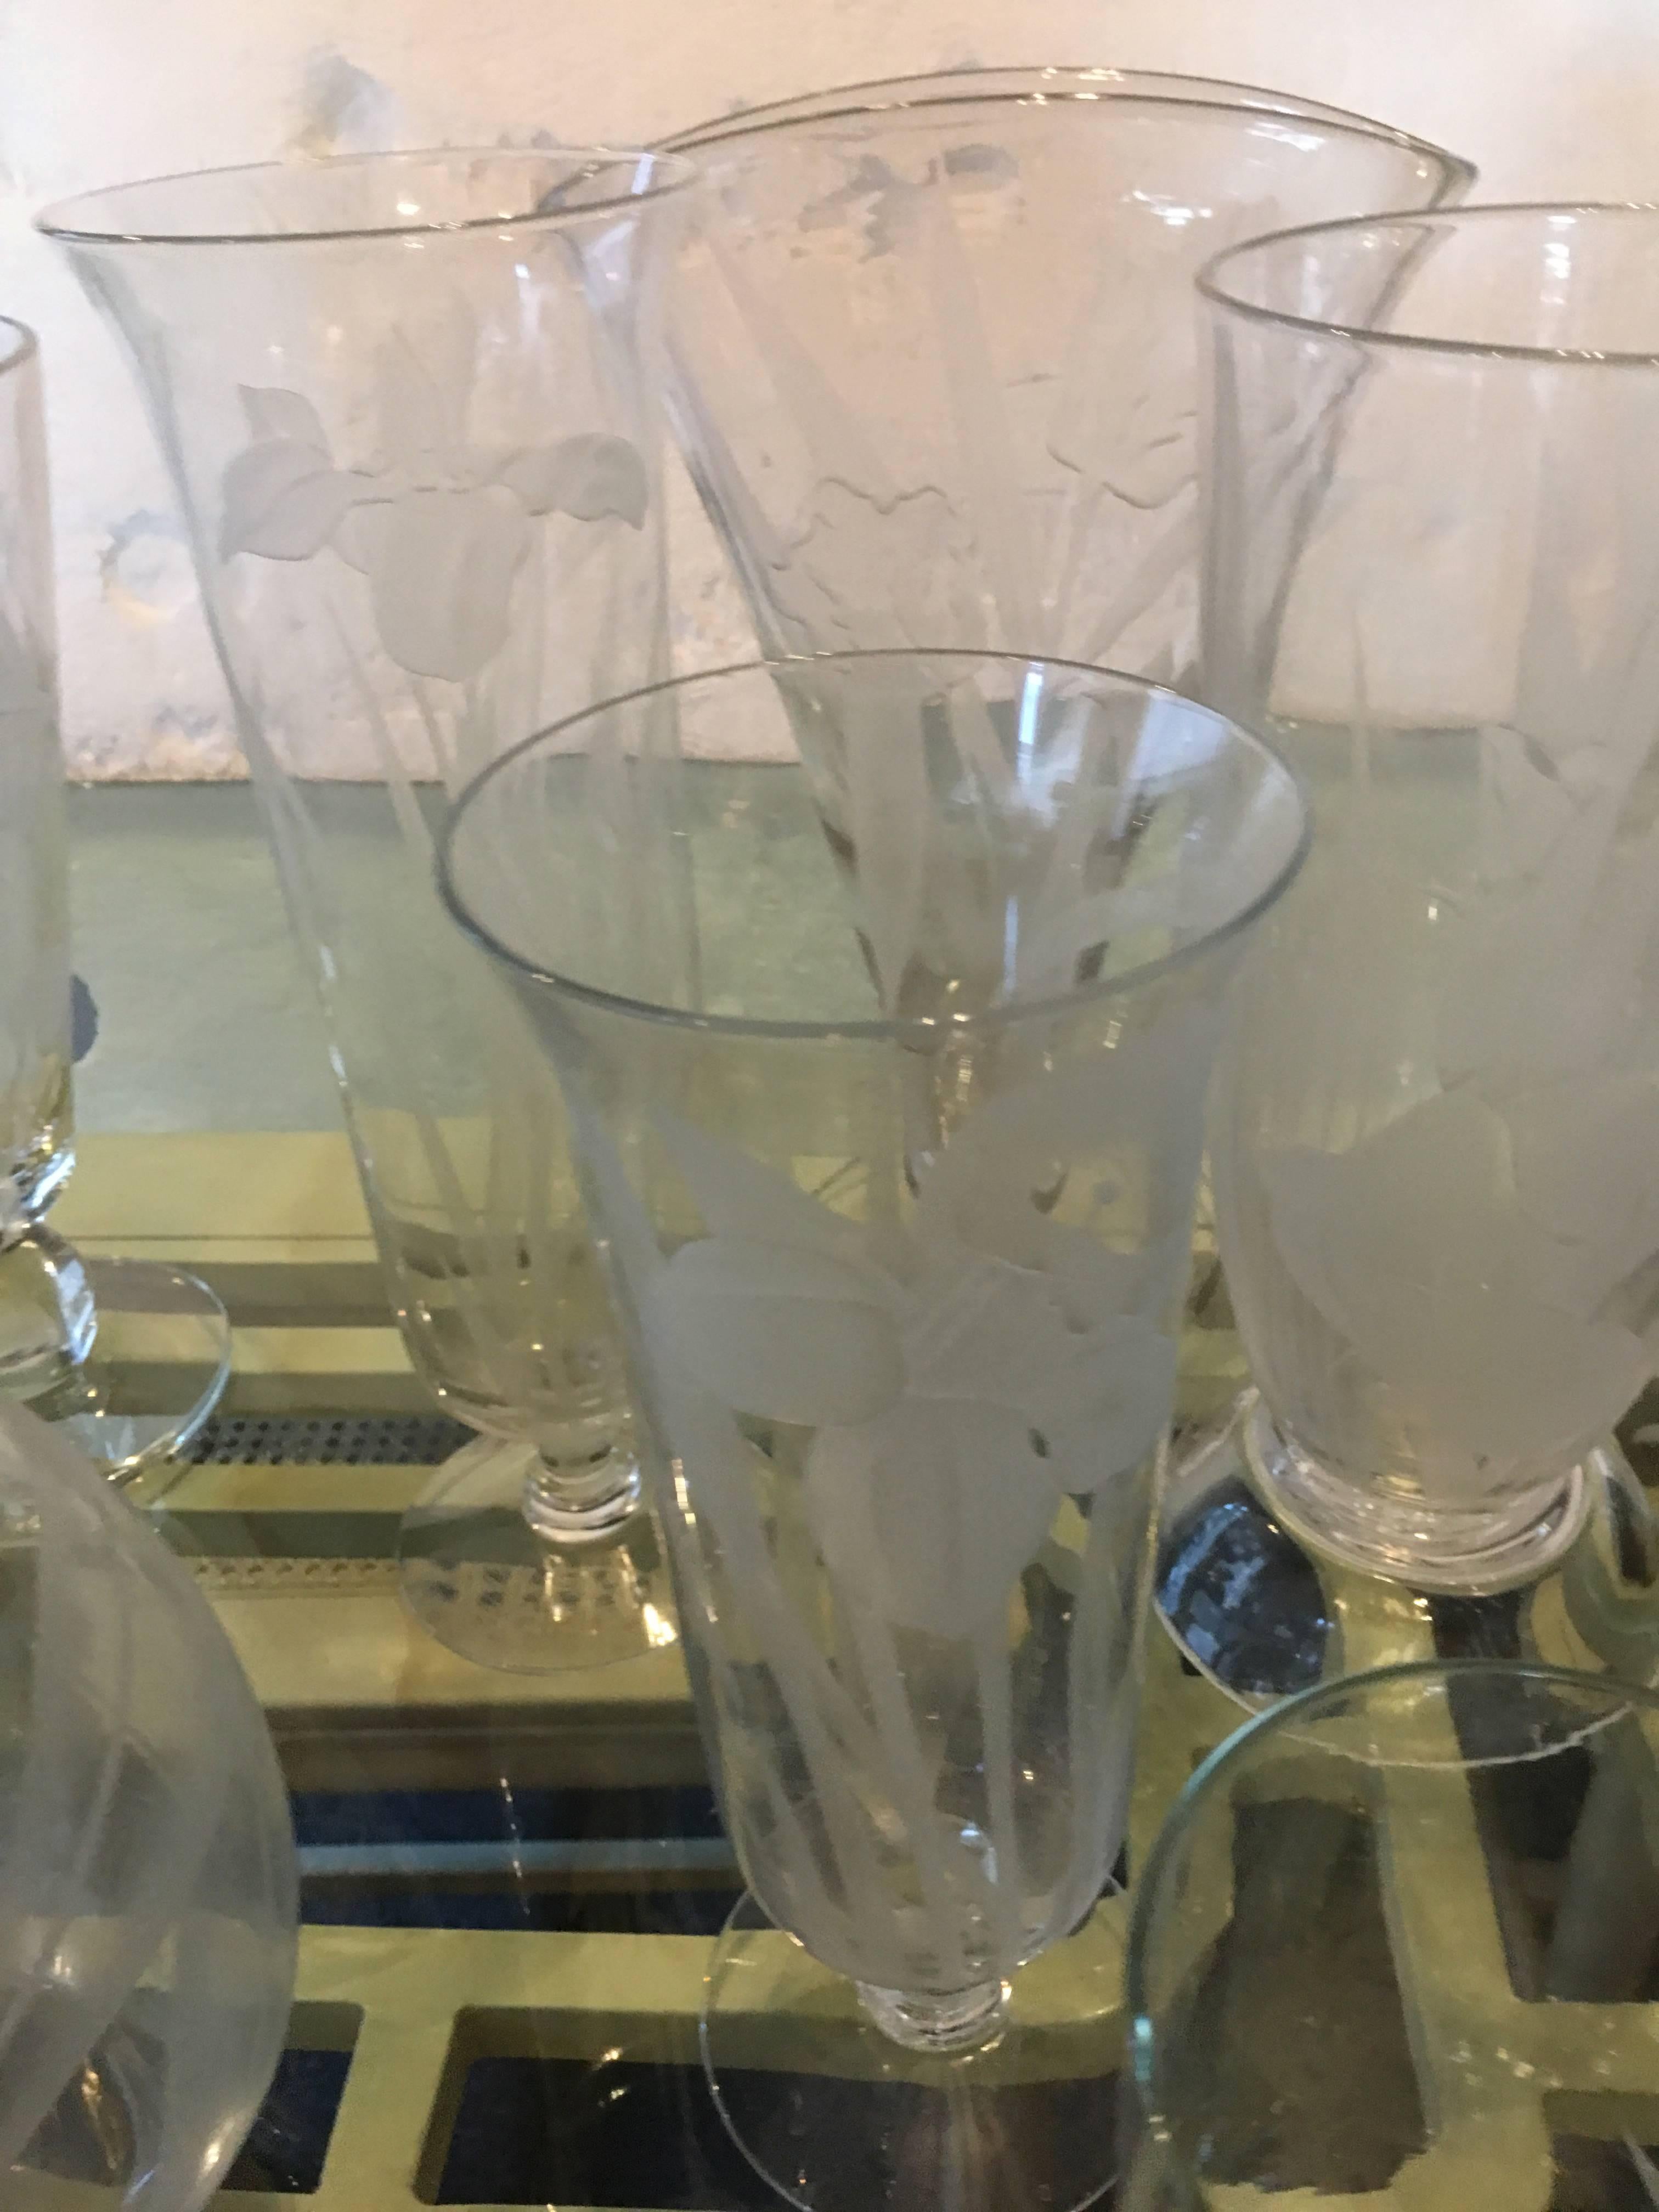 From a collection that took over 30 years to acquire, is a set of 13 pieces of Dorothy Thorpe, California etched vases. 12 are vases, and 1 is a very rare candle pillar with stand. These vases were very expensive when new in the 1960s, all deeply